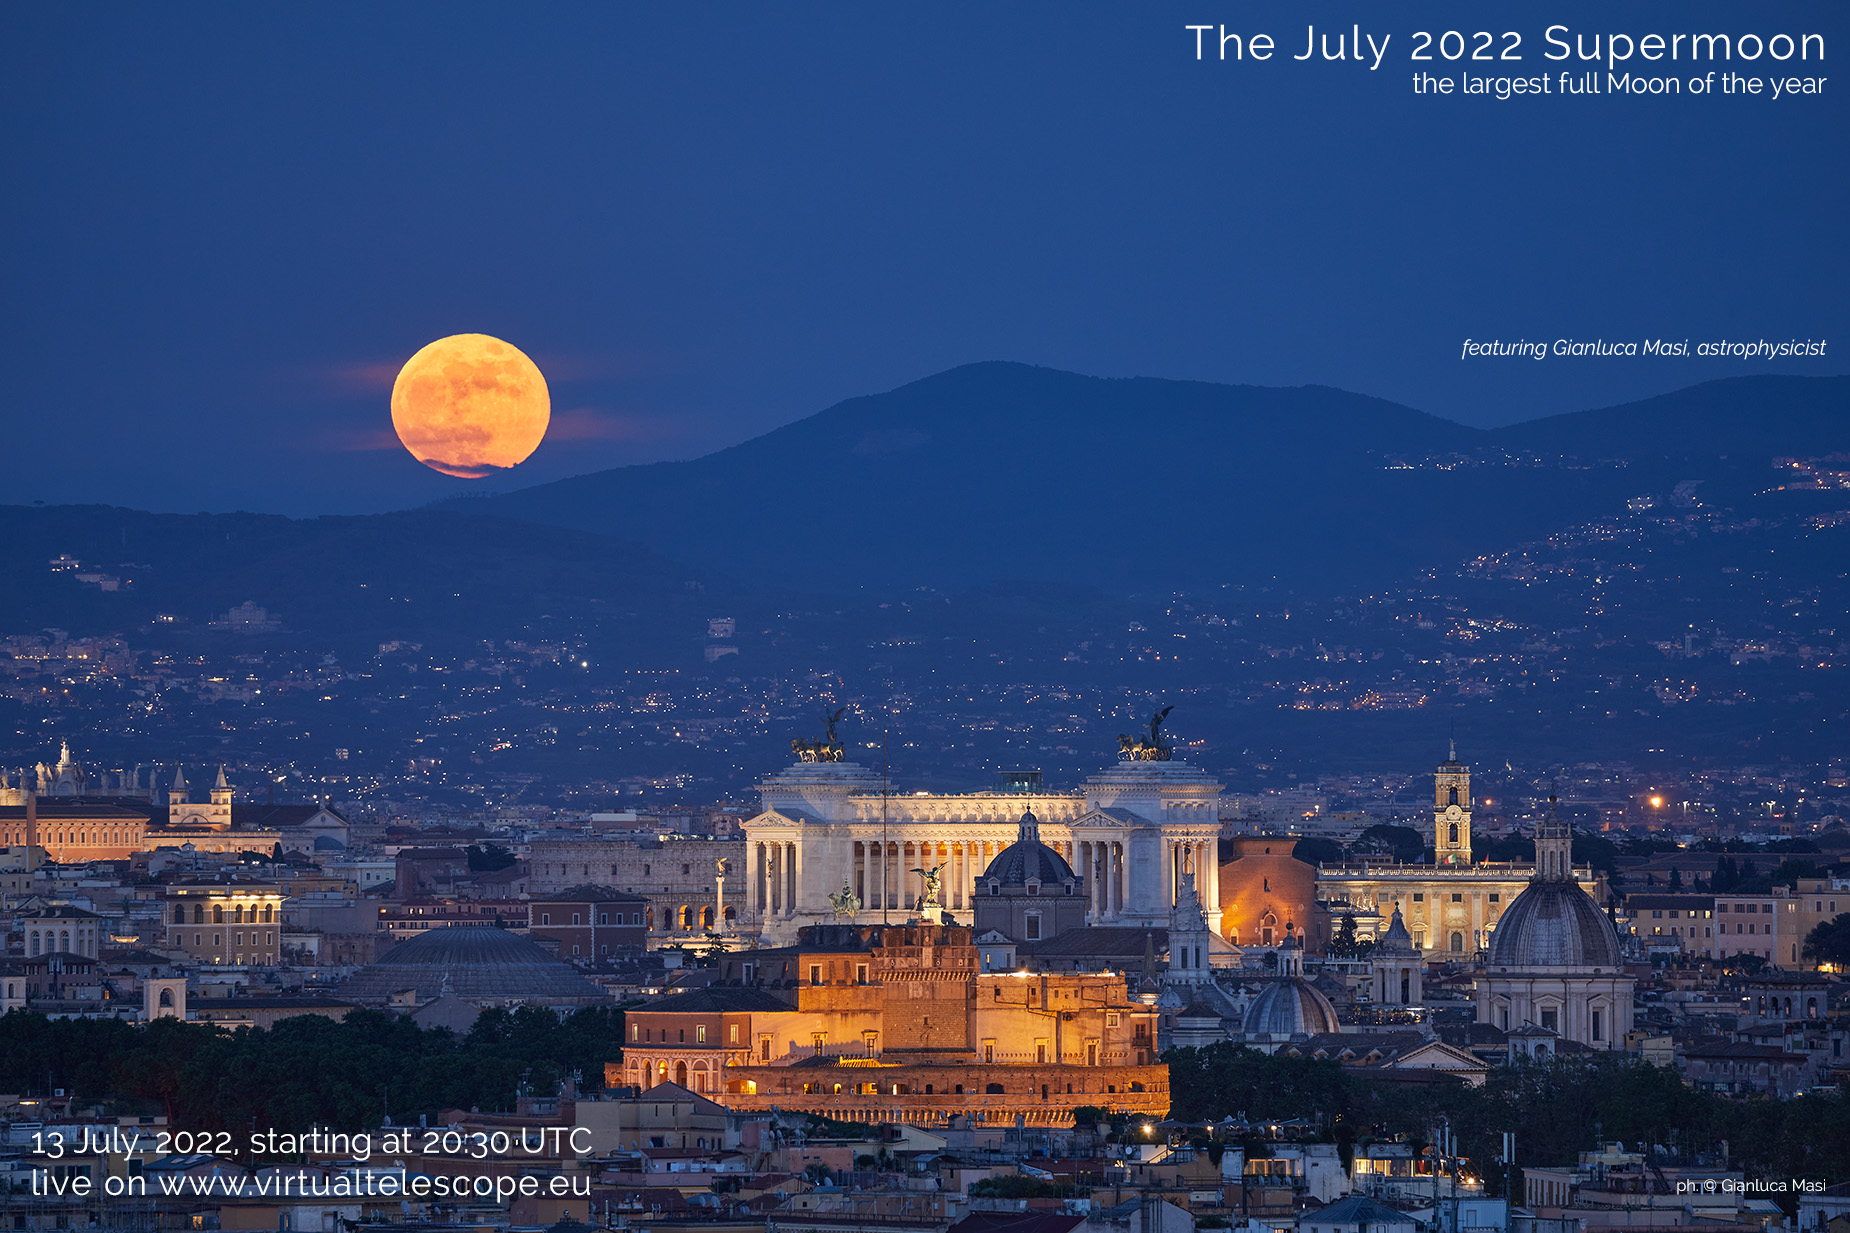 The July 2022 Supermoon - poster of the event.